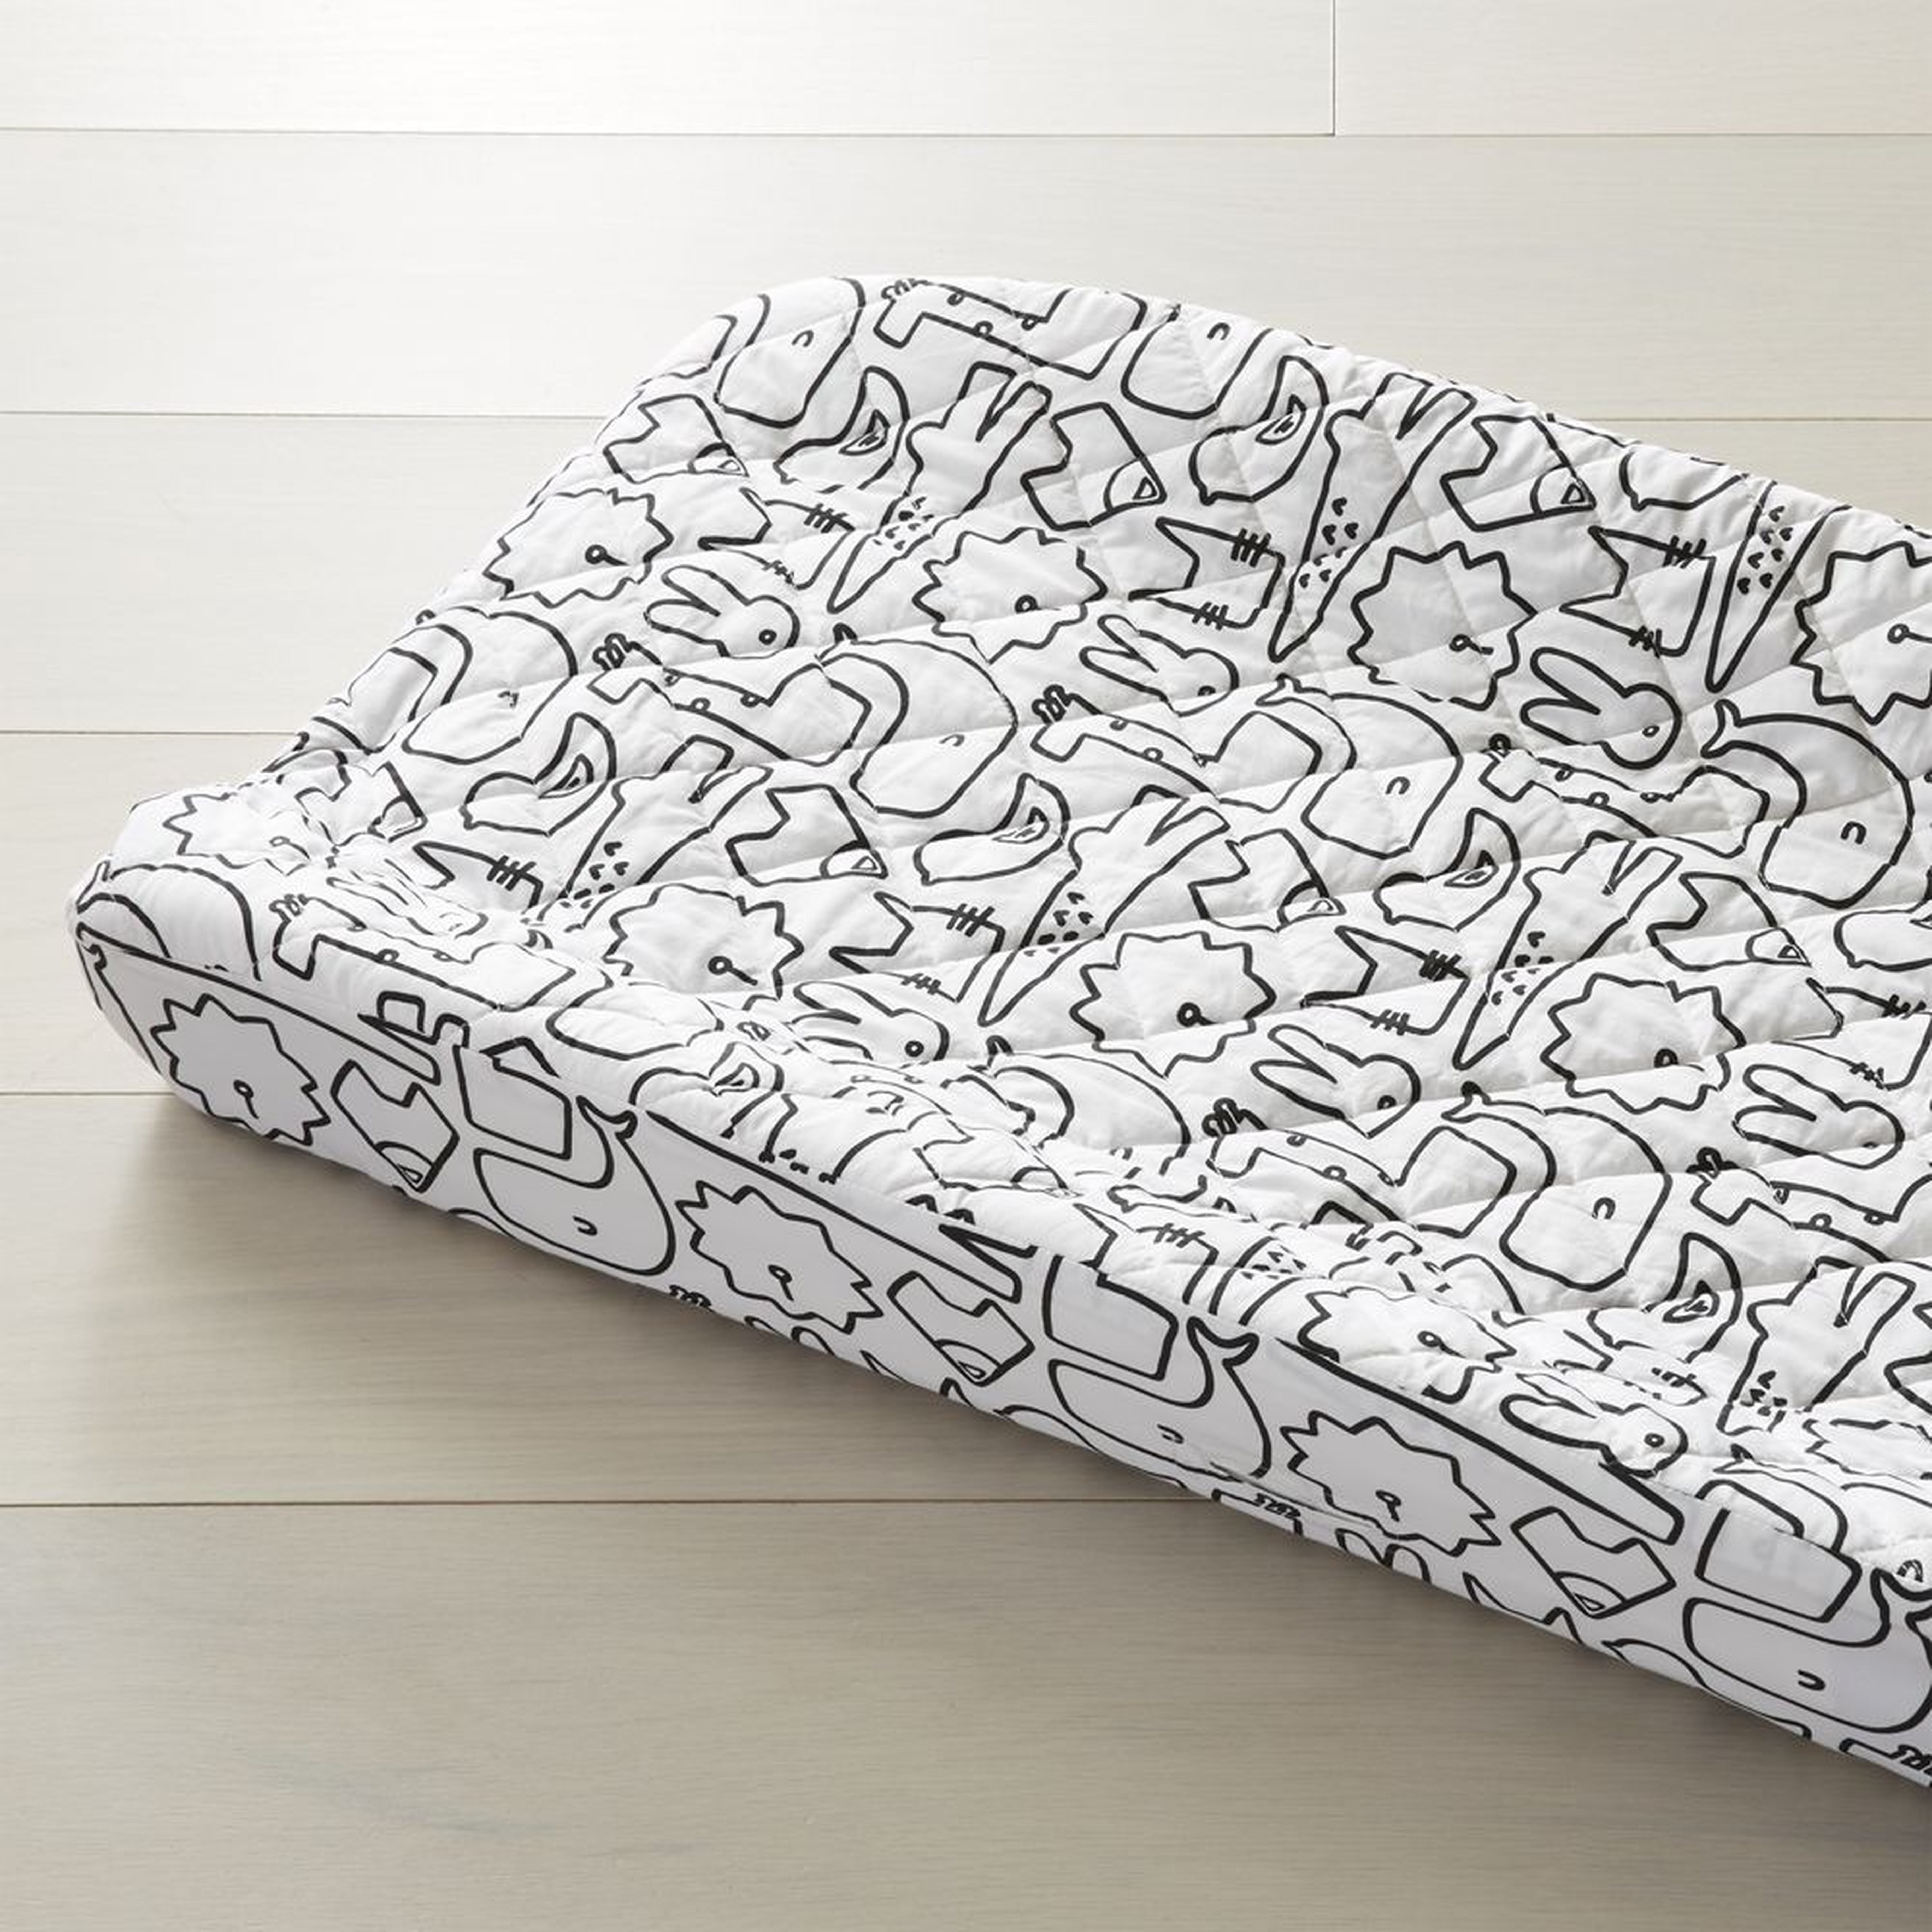 Black and White Animal Changing Pad Cover - Crate and Barrel